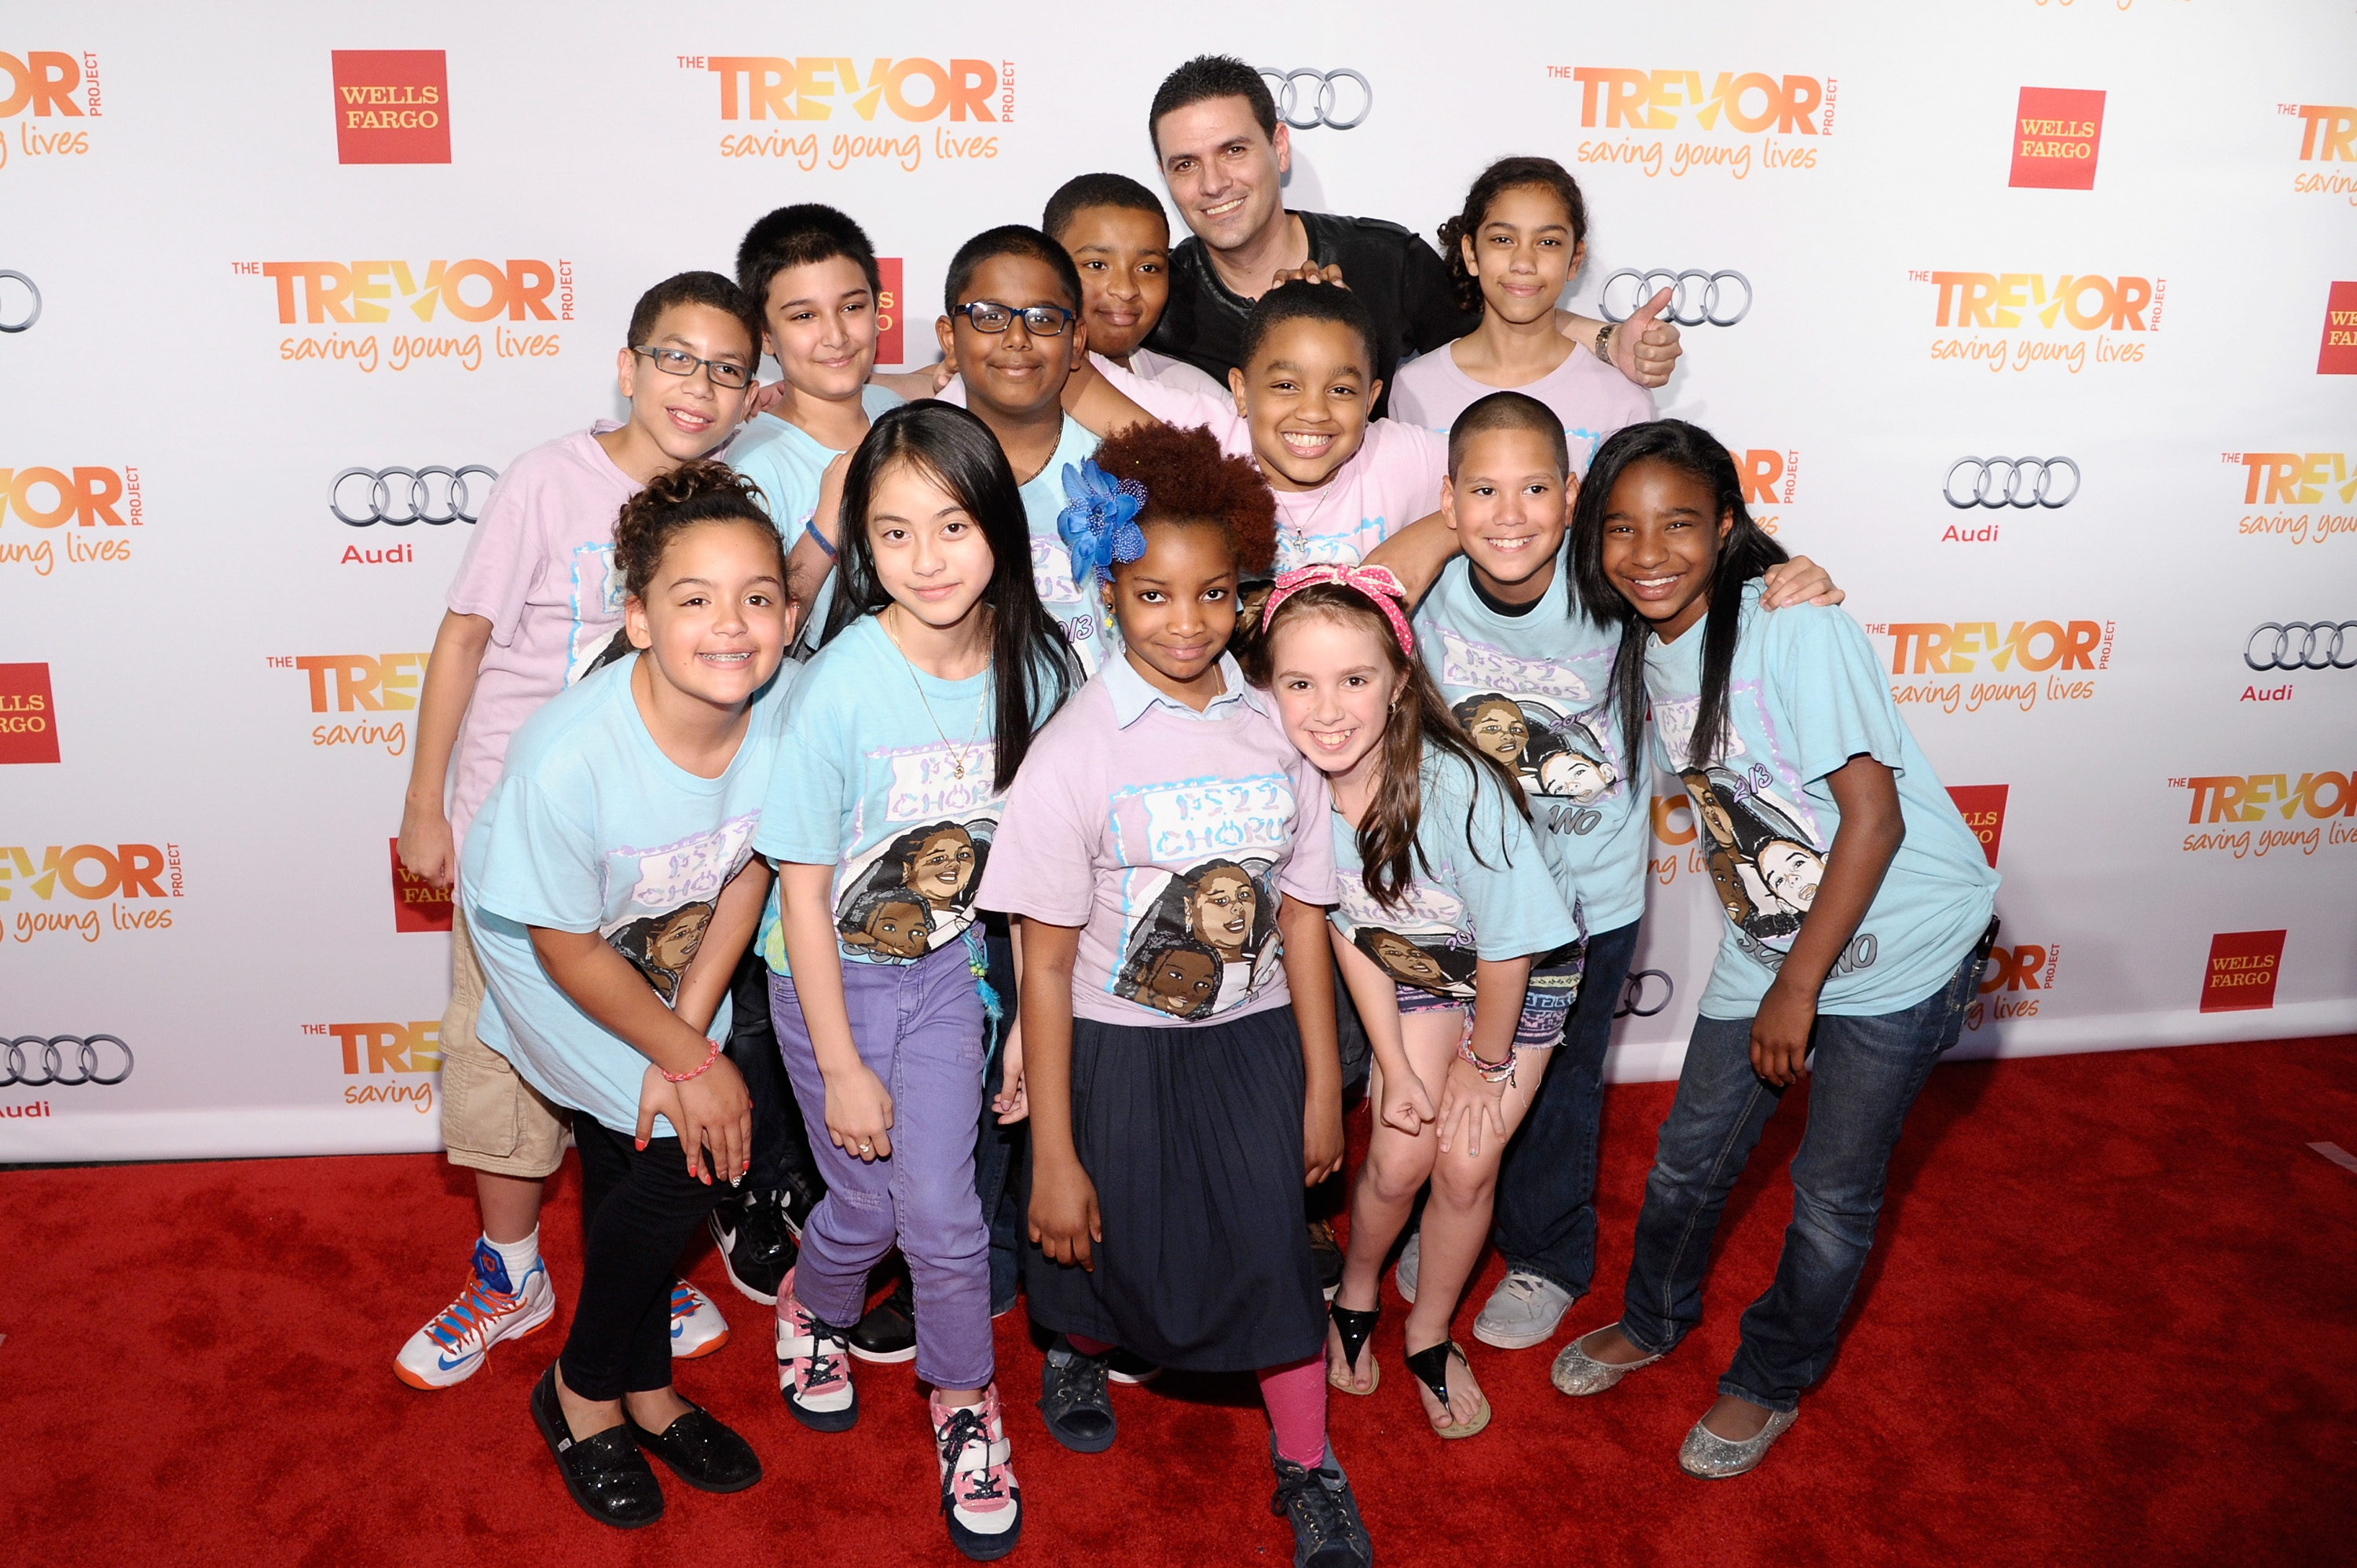 Members of the PS22 Chorus attend The Trevor Project's 2013 "TrevorLIVE" Event on June 17, 2013 in New York City. (Ilya S. Savenok&mdash;2013 Getty Images)